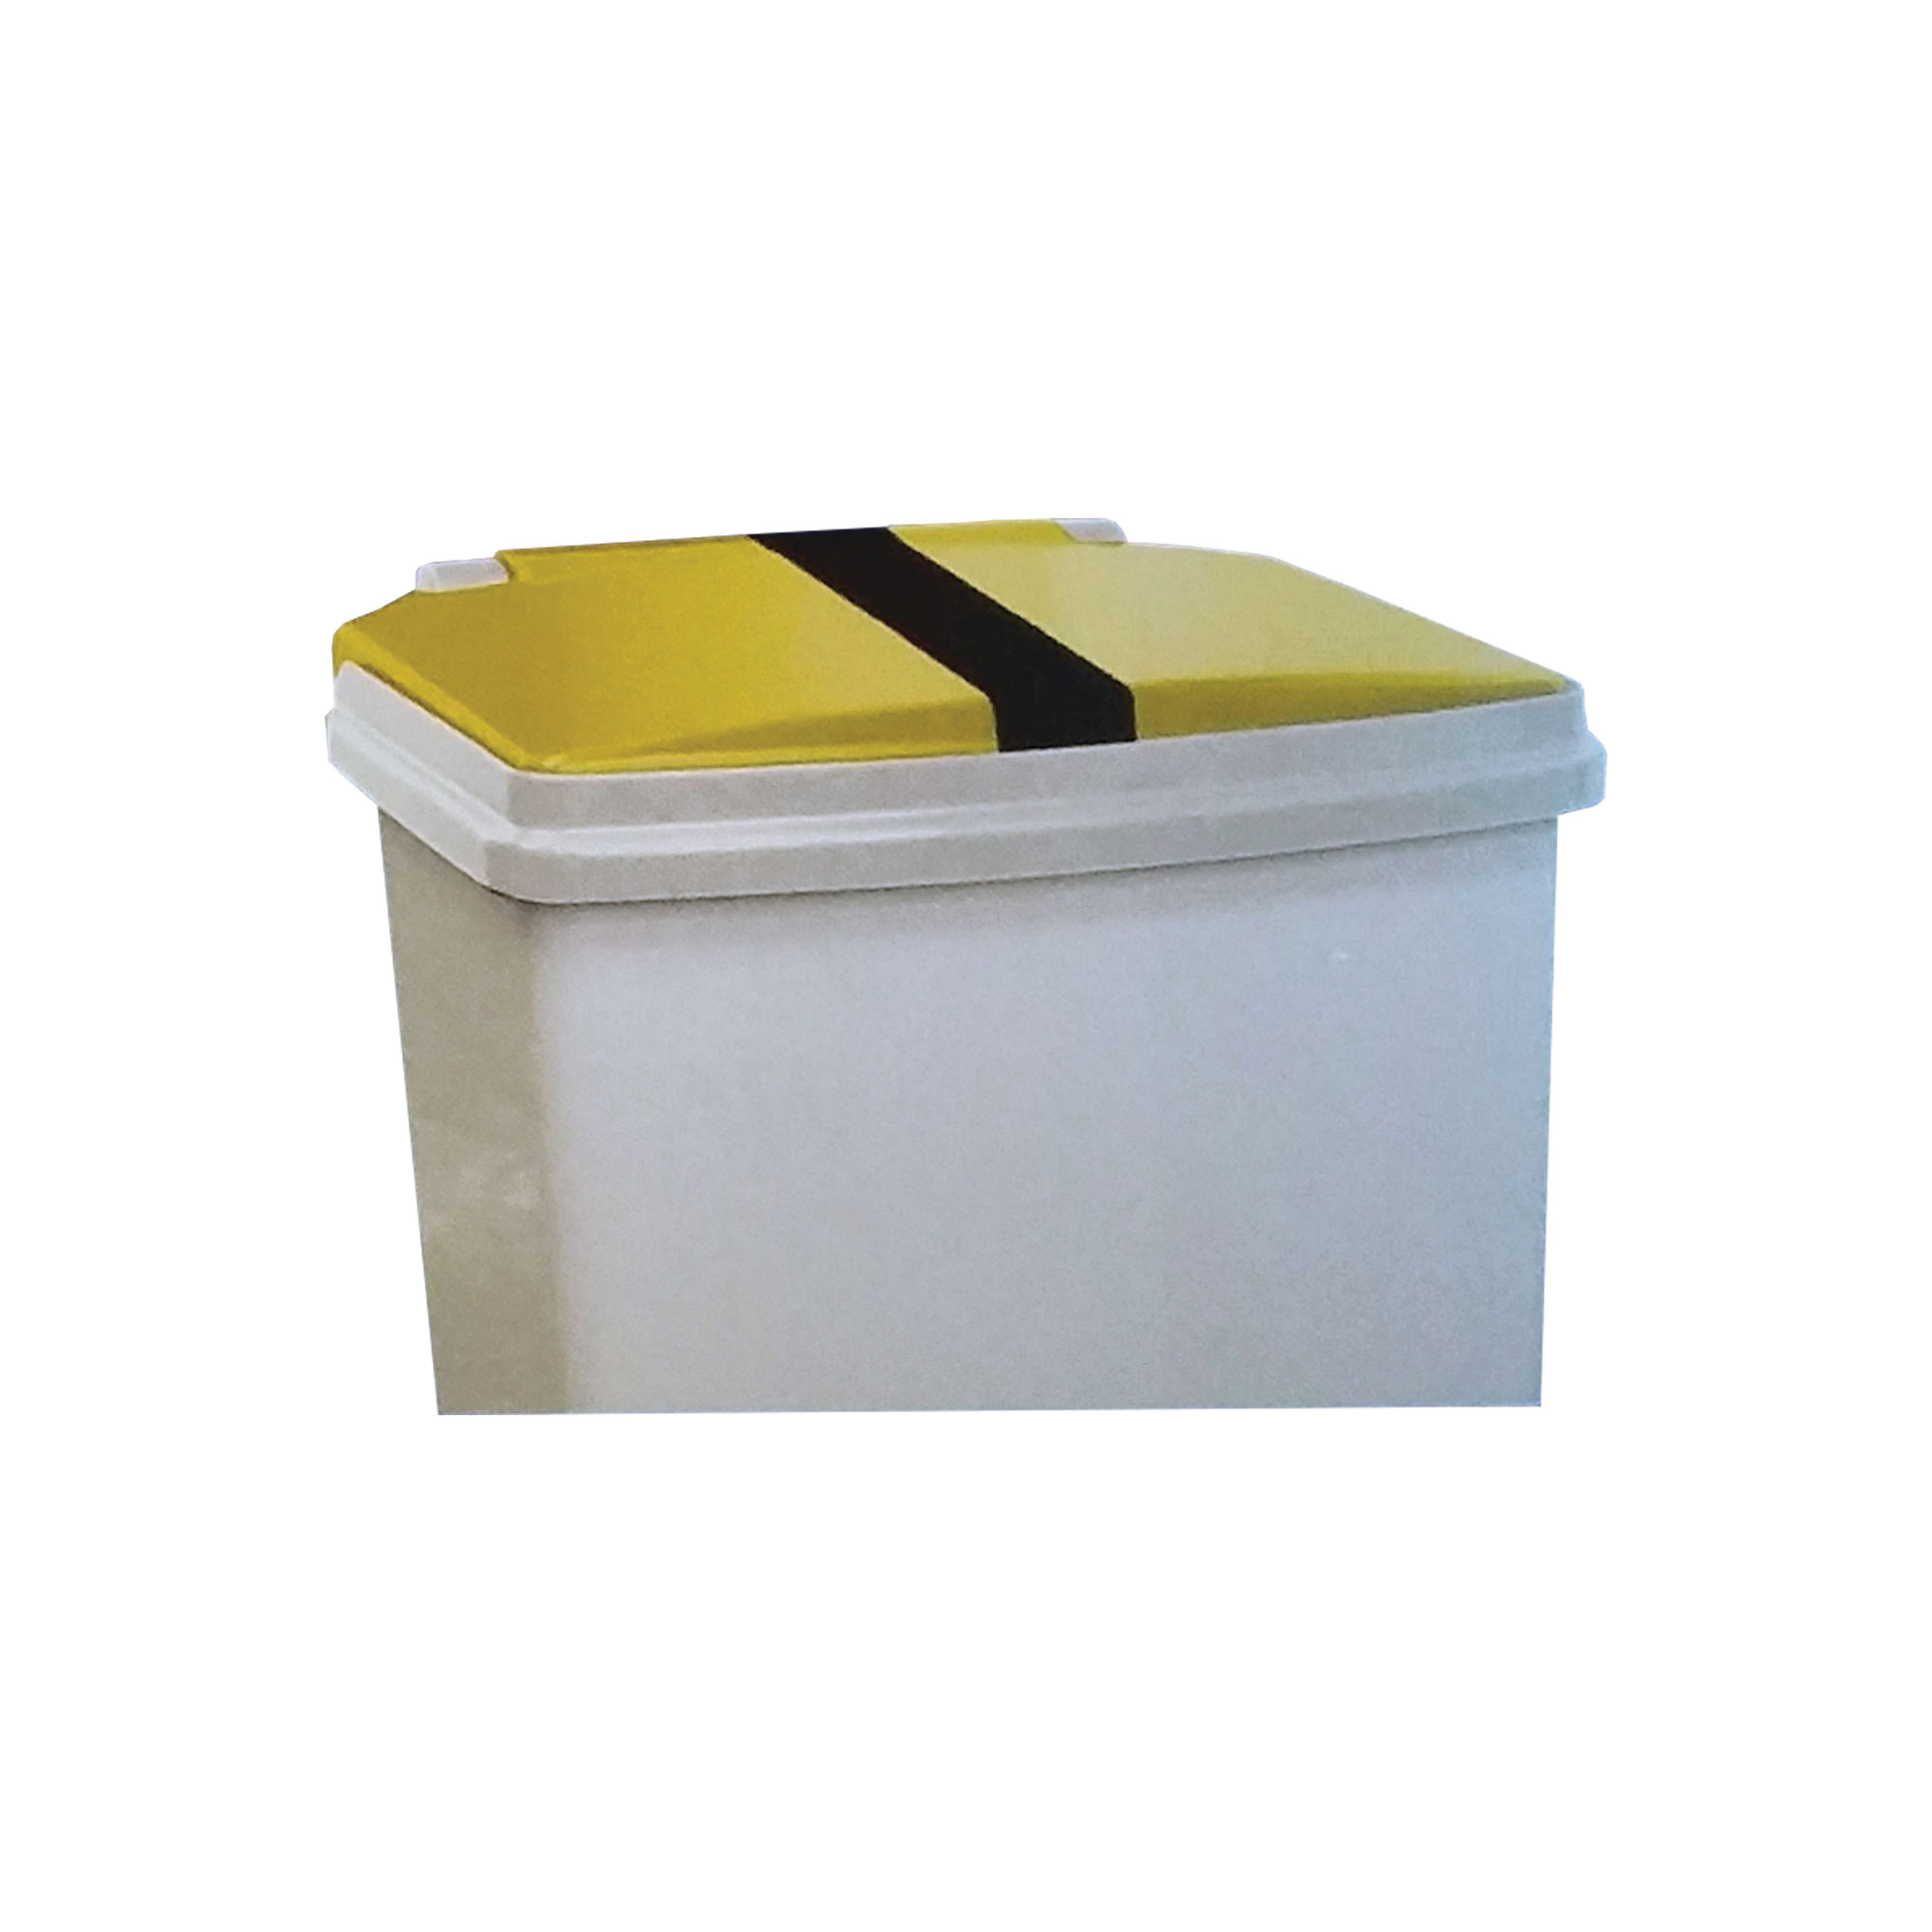 Tiger Stripe Replacement Lid For EB-3296 & EB-3297